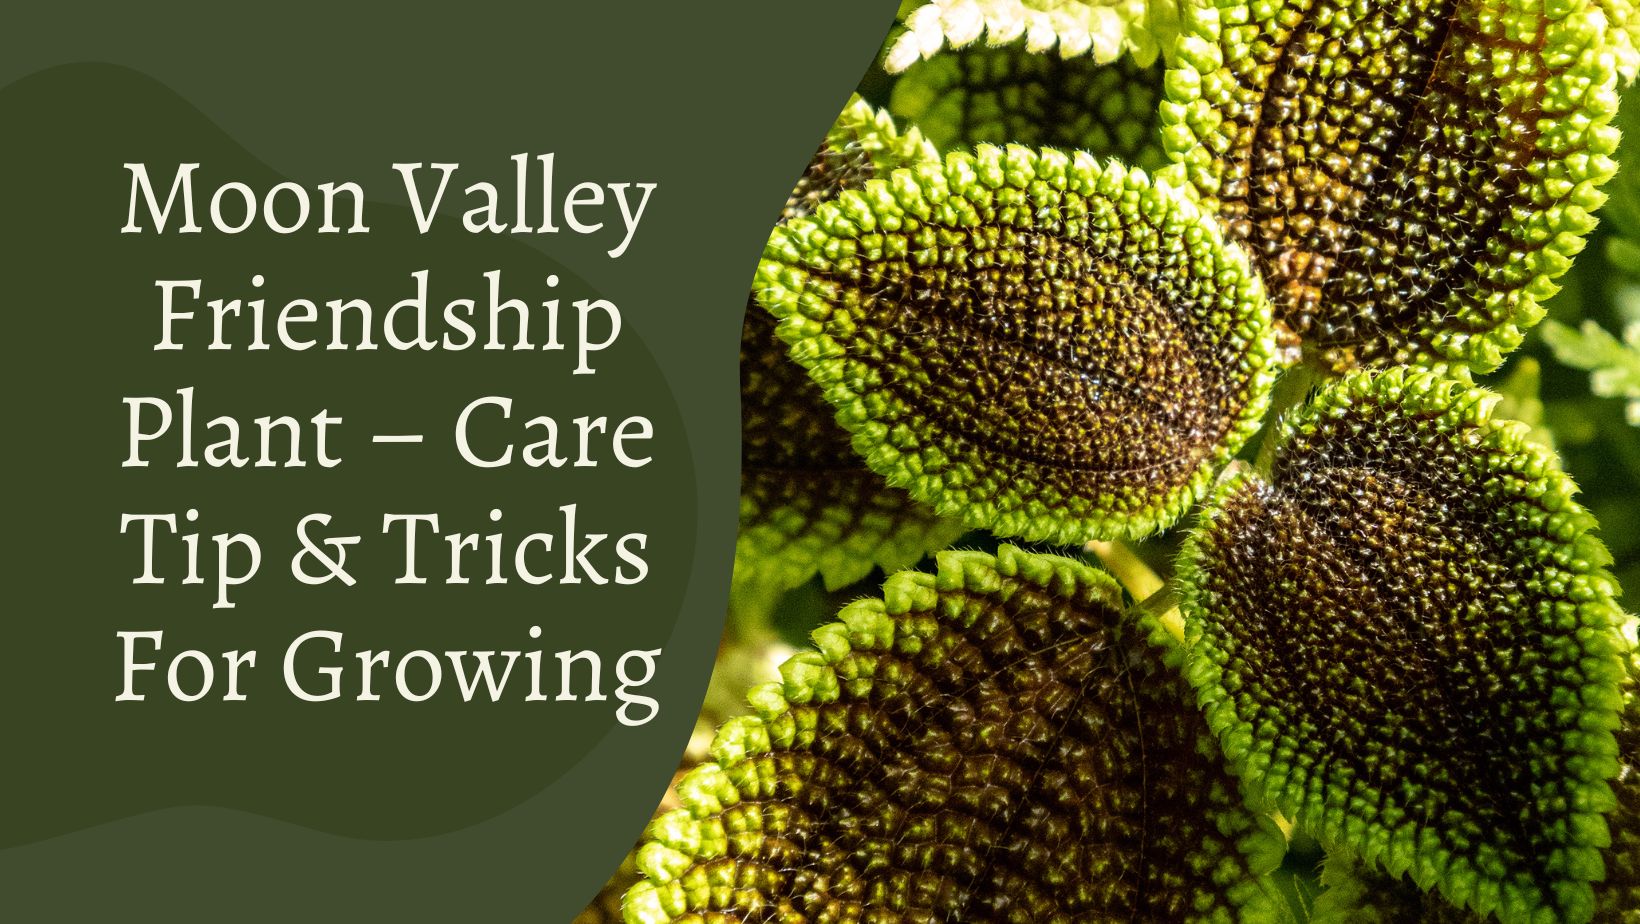 Moon Valley Friendship Plant – Care Tip & Tricks For Growing